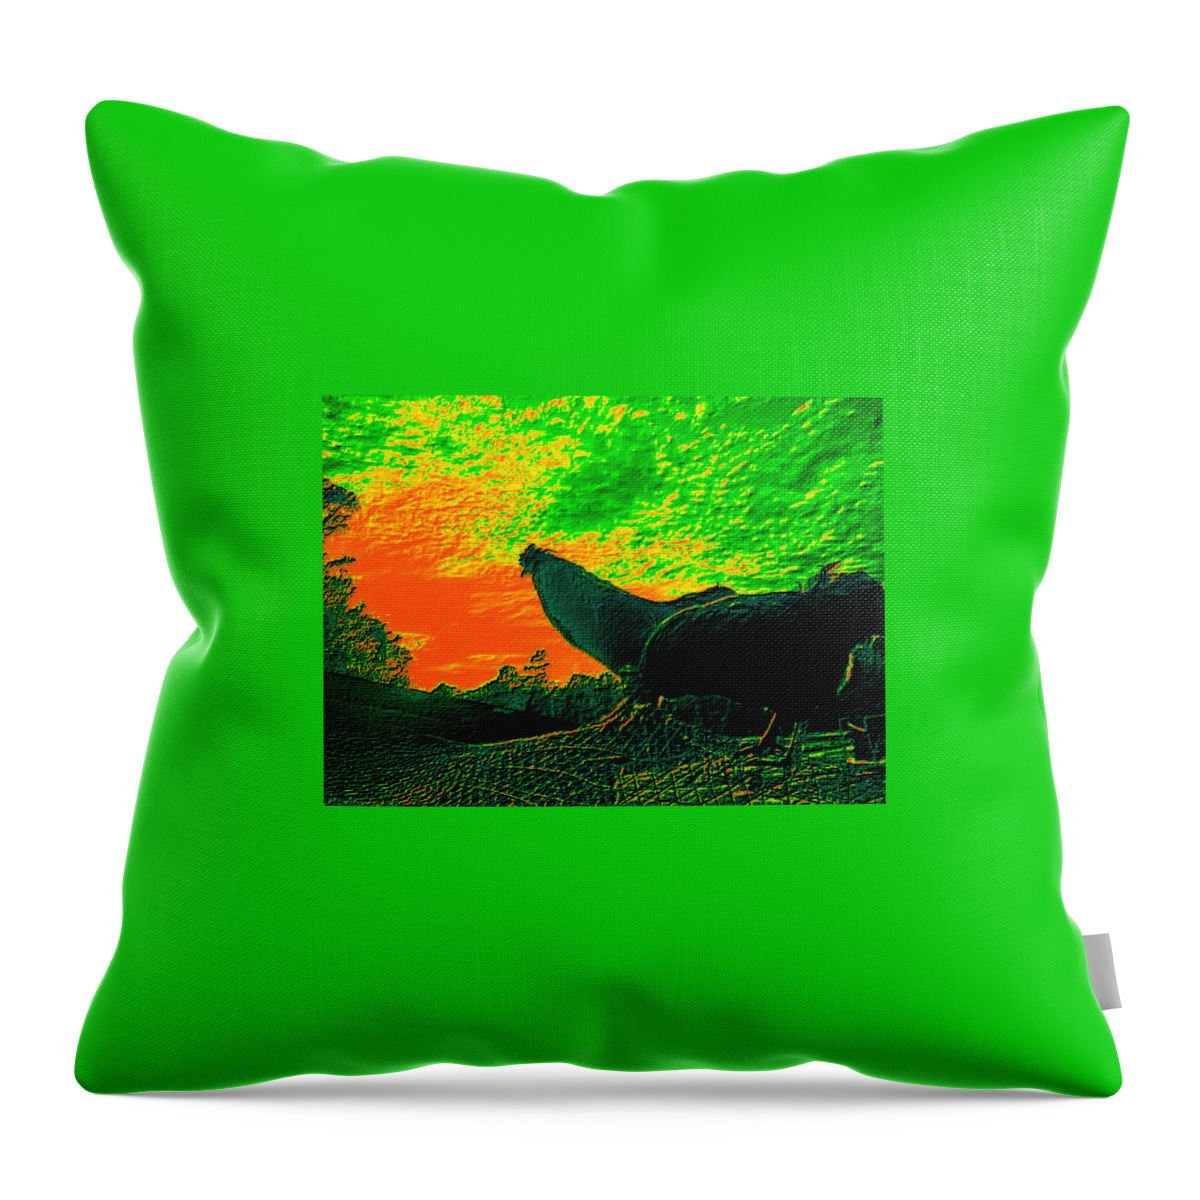 Sunset Throw Pillow featuring the photograph Sunset Rooster by Dawn Mullis